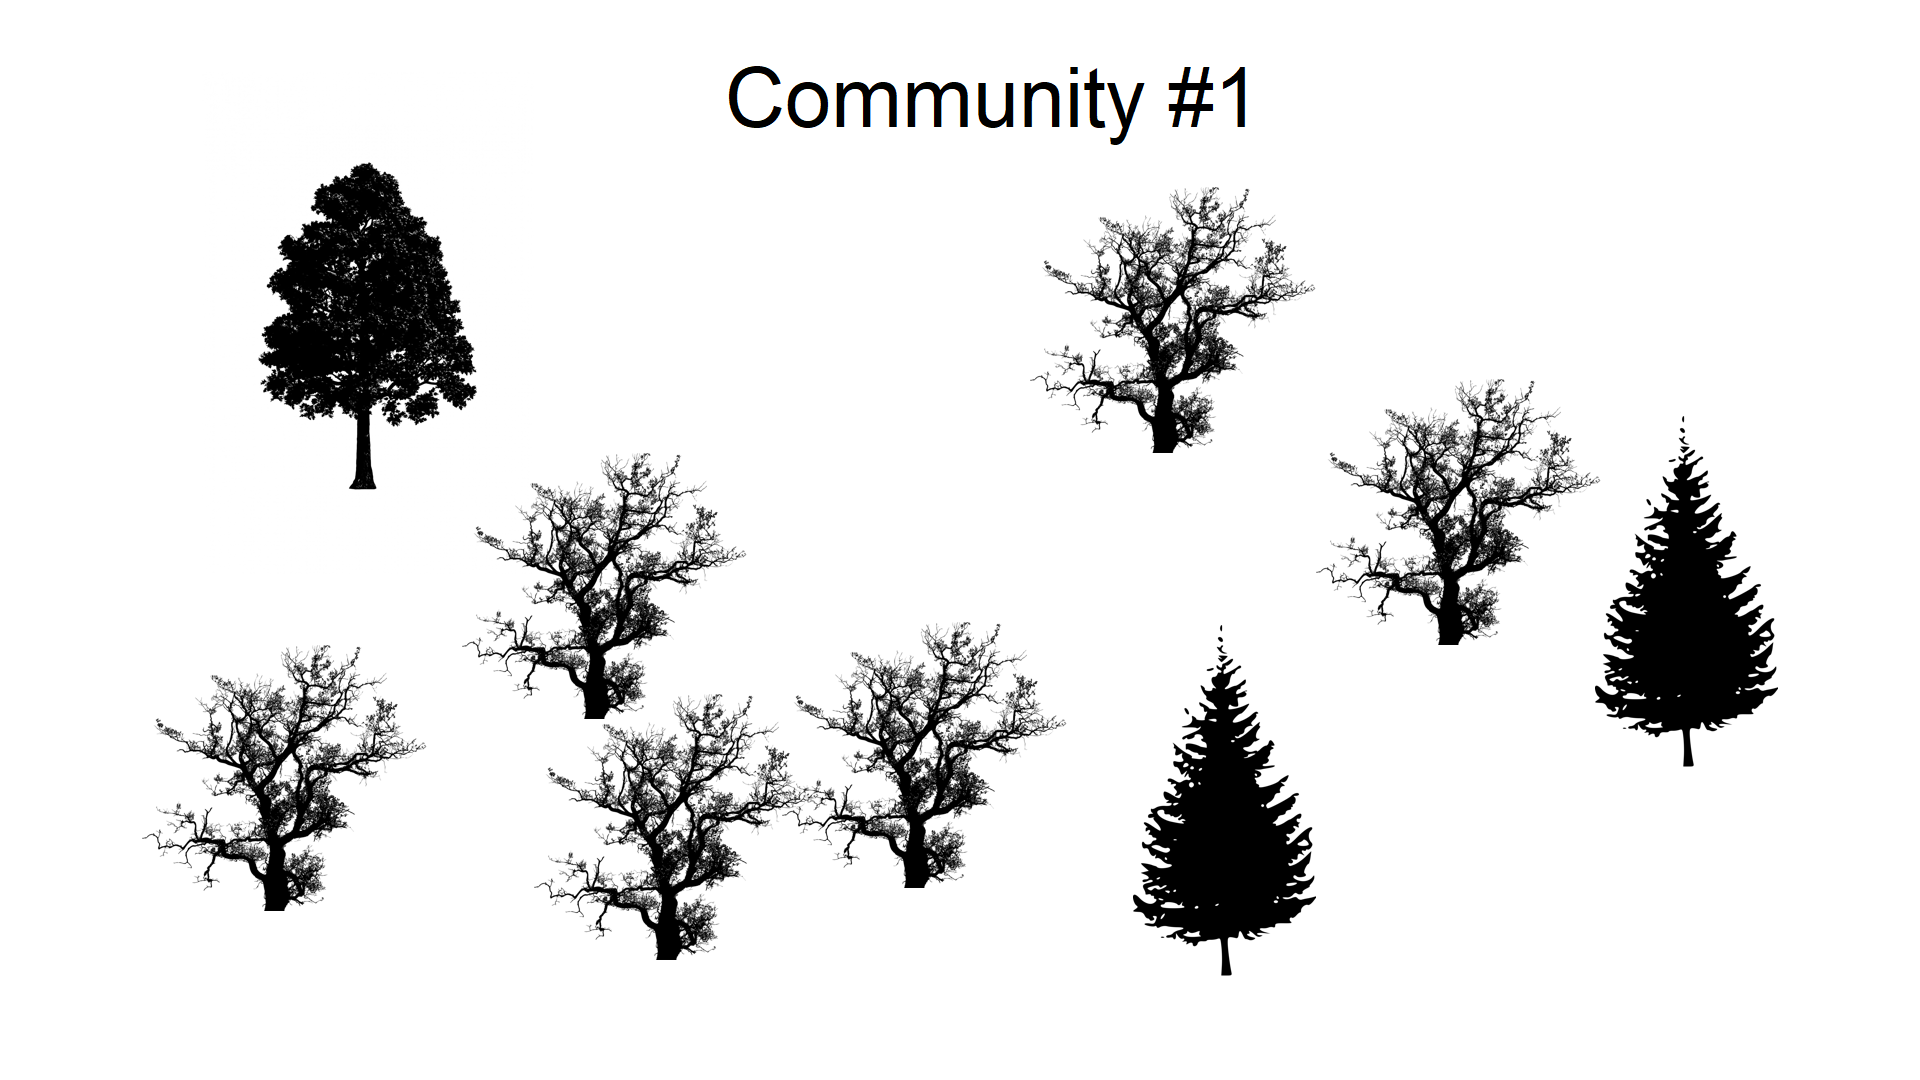 Tree community #1 has six individuals of an irregularly branching species, one individual with densely packed leaves, and two conifers.